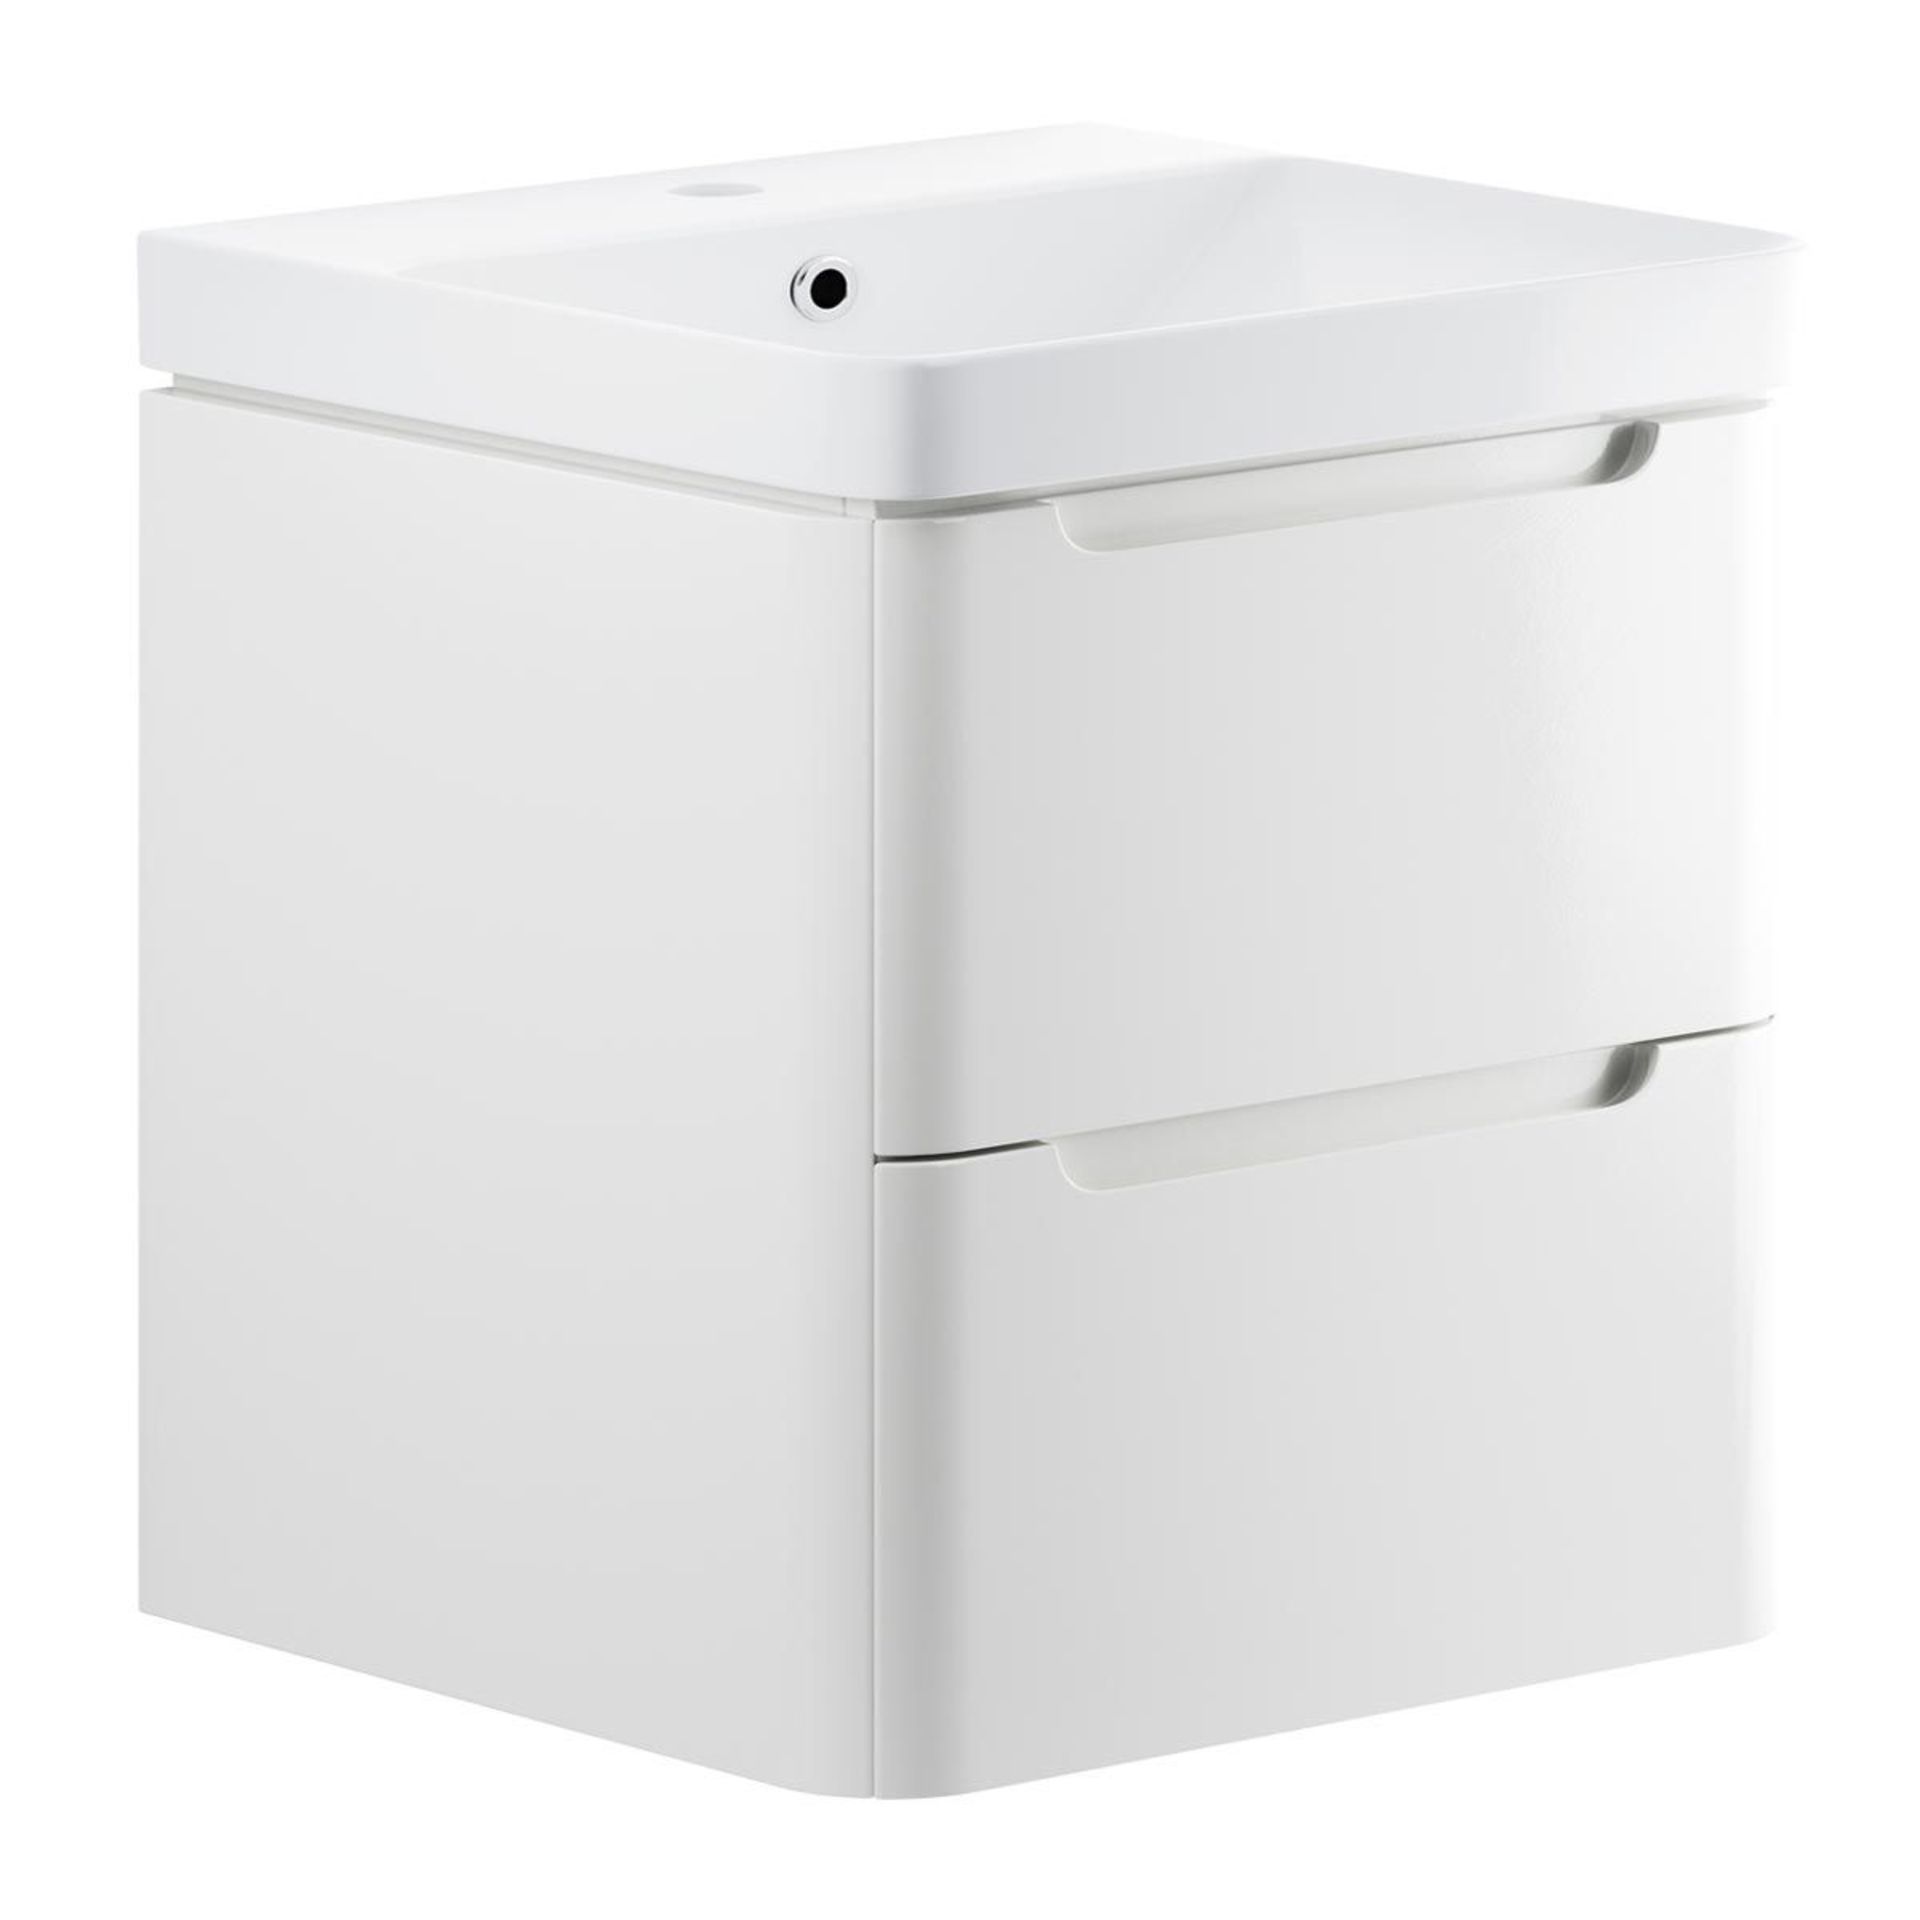 NEW AND BOXED 500MM Lambra Wall Hung Vanity Unit. RRP £402.98. WHITE GLOSS, BASIN INCLUDED.